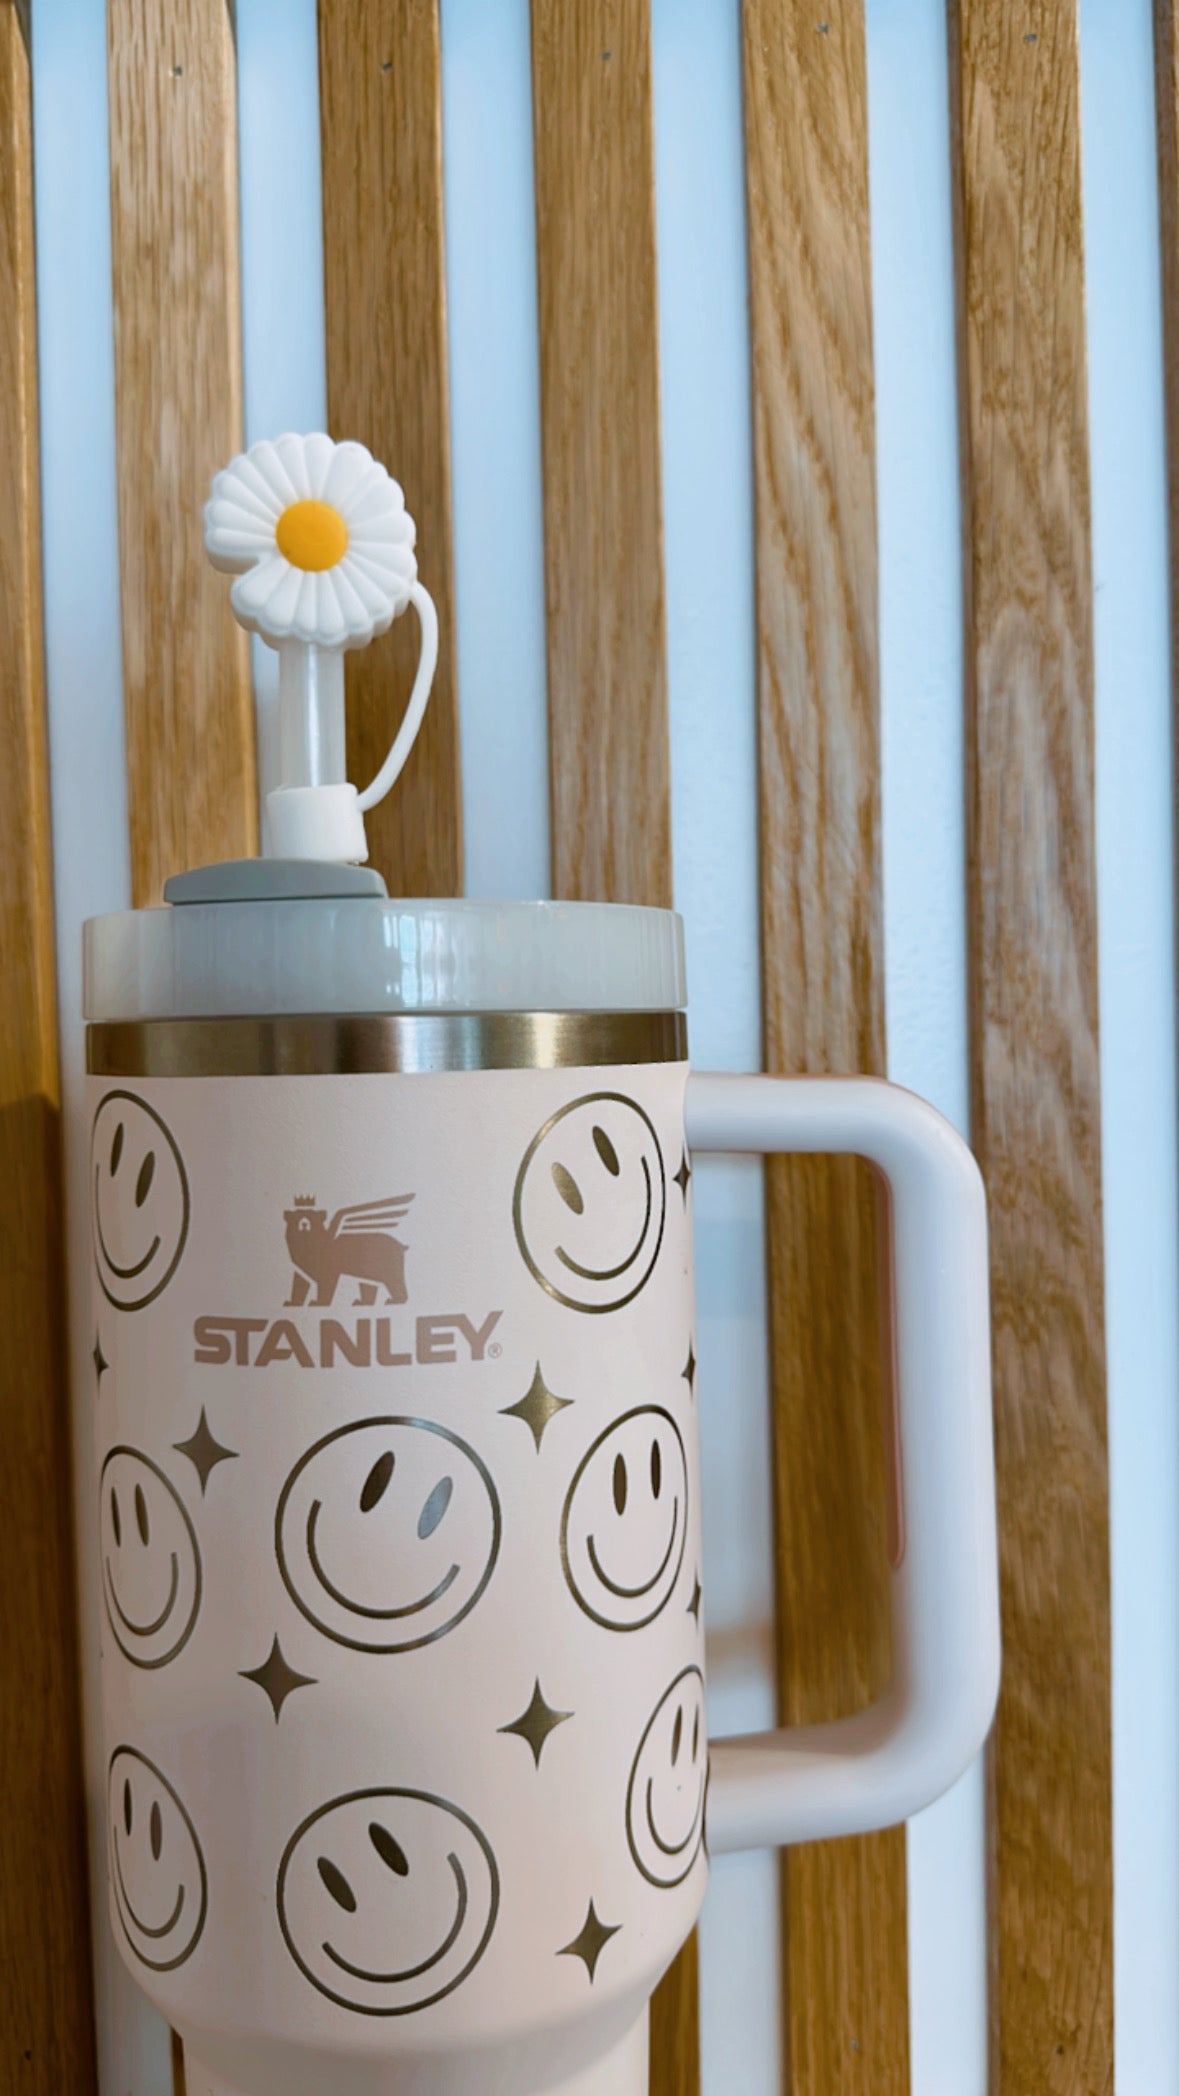 Stanley tumbler straw covers